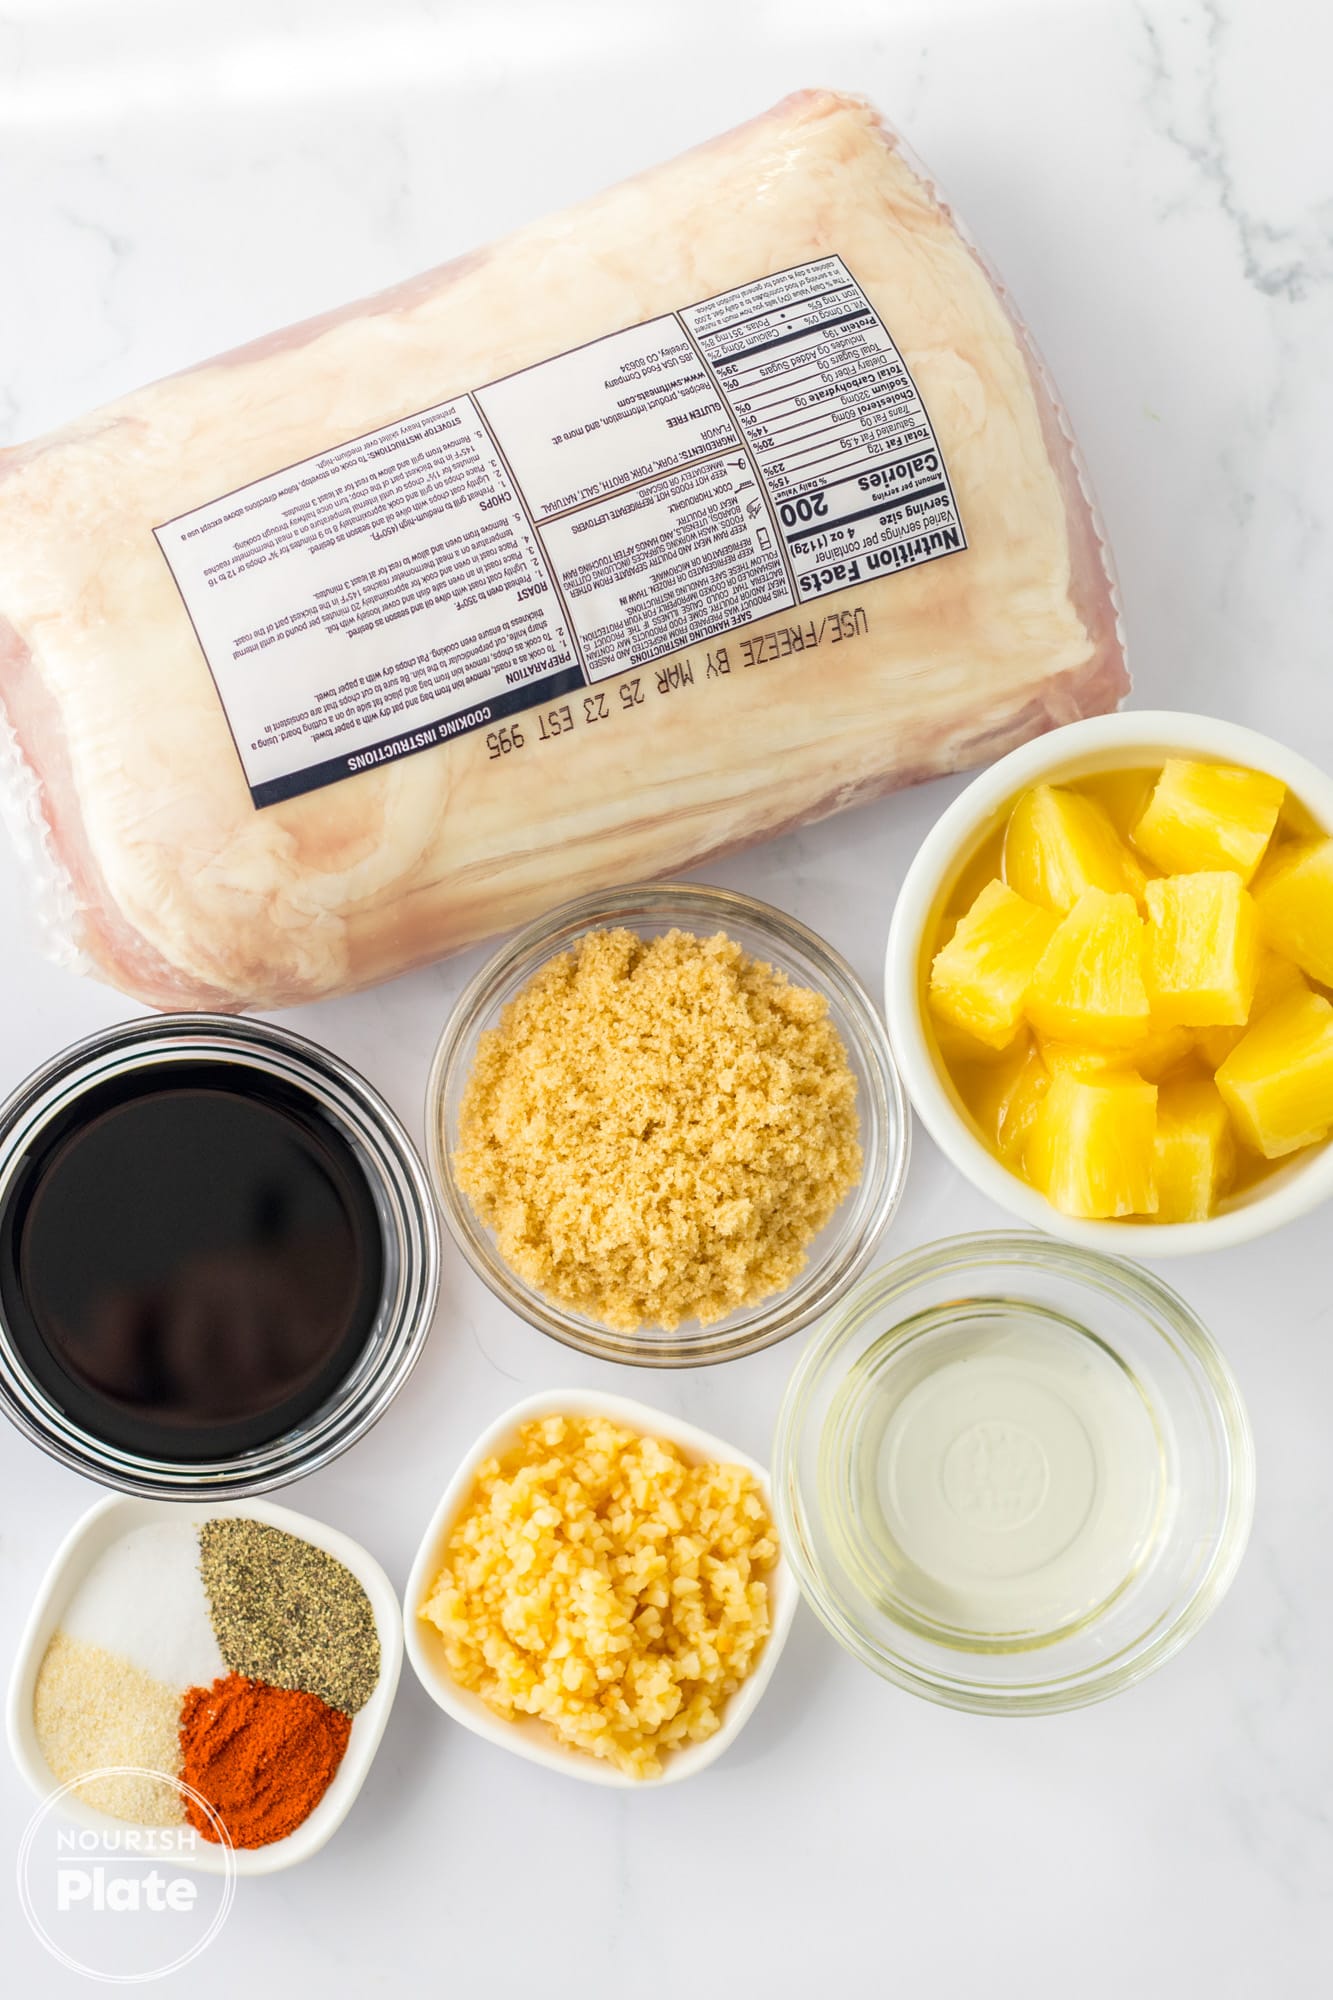 Ingredients needed to make slow cooker pineapple pork loin